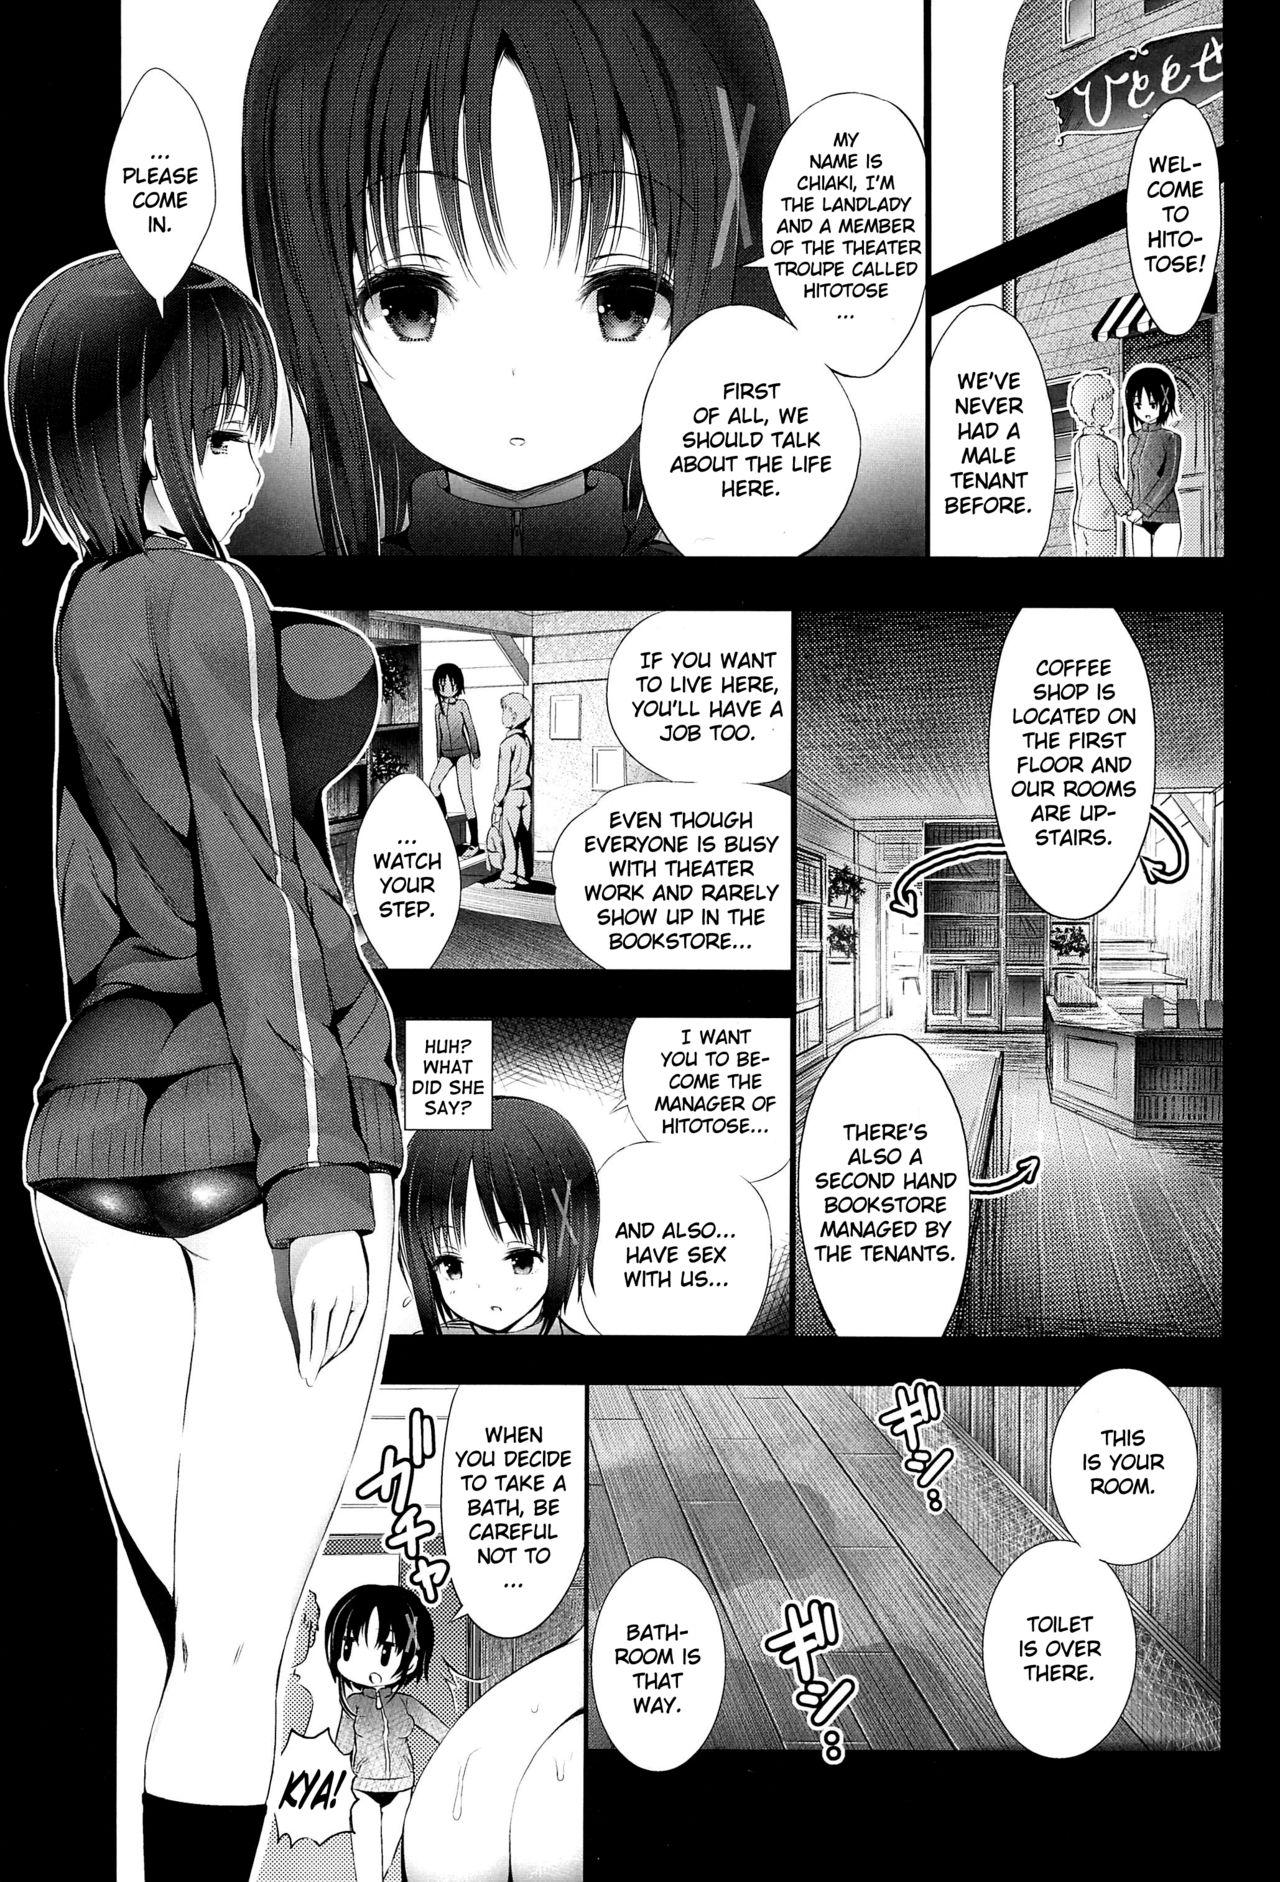 Animated Hitotose ni Youkoso | Welcome to Hitotose - Hinako note Swing - Page 2